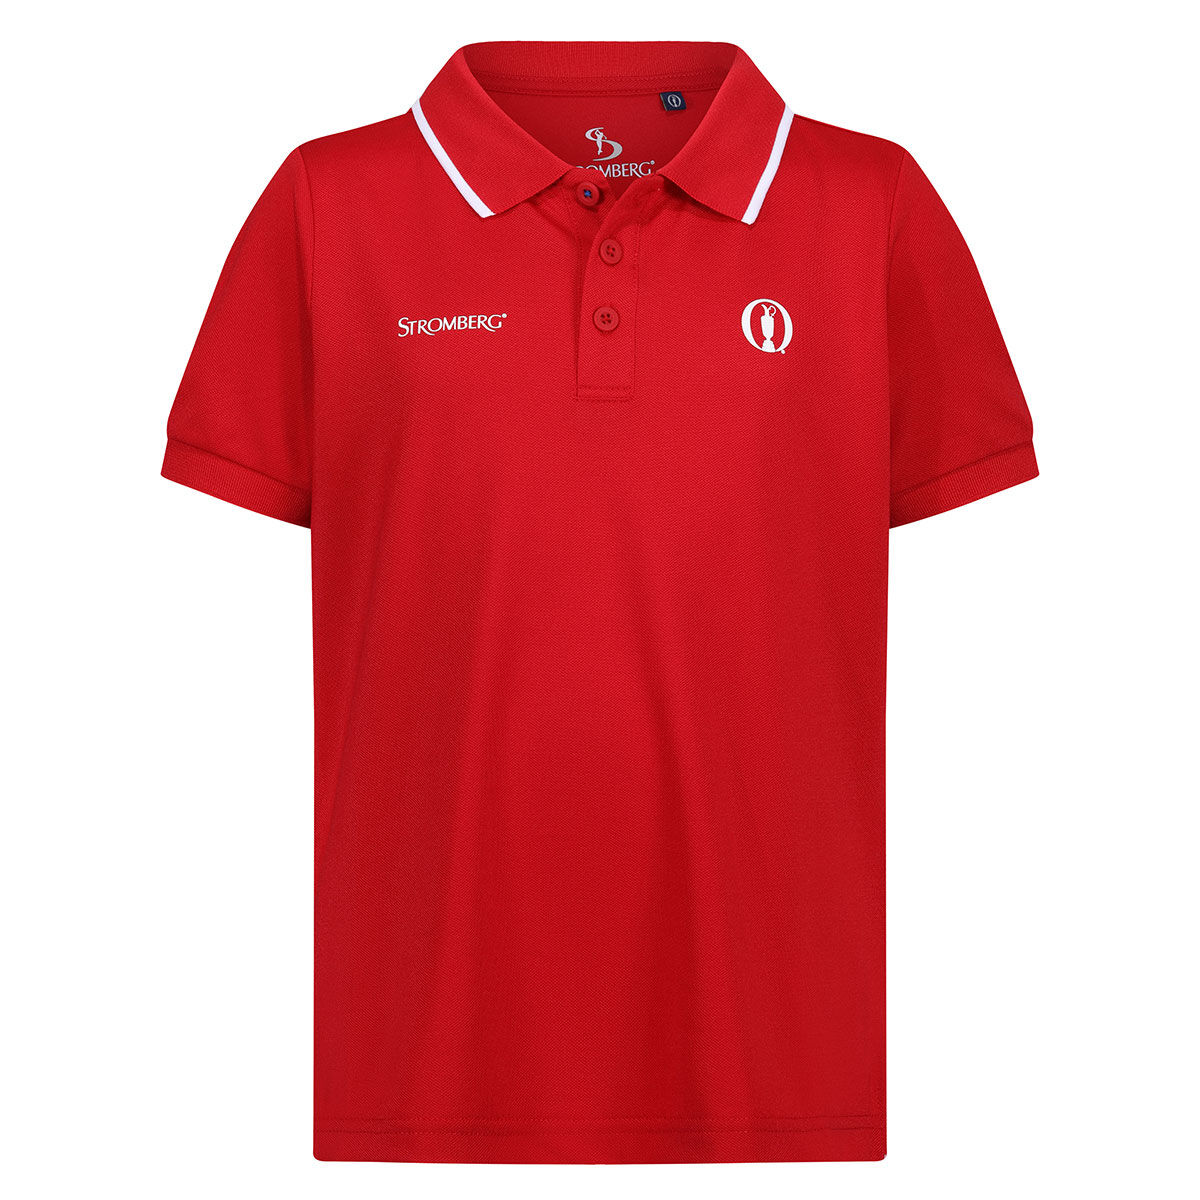 Stromberg Junior The Open Harbour Stretch Golf Polo Shirt, Unisex, Tango red, 13-14 years | American Golf